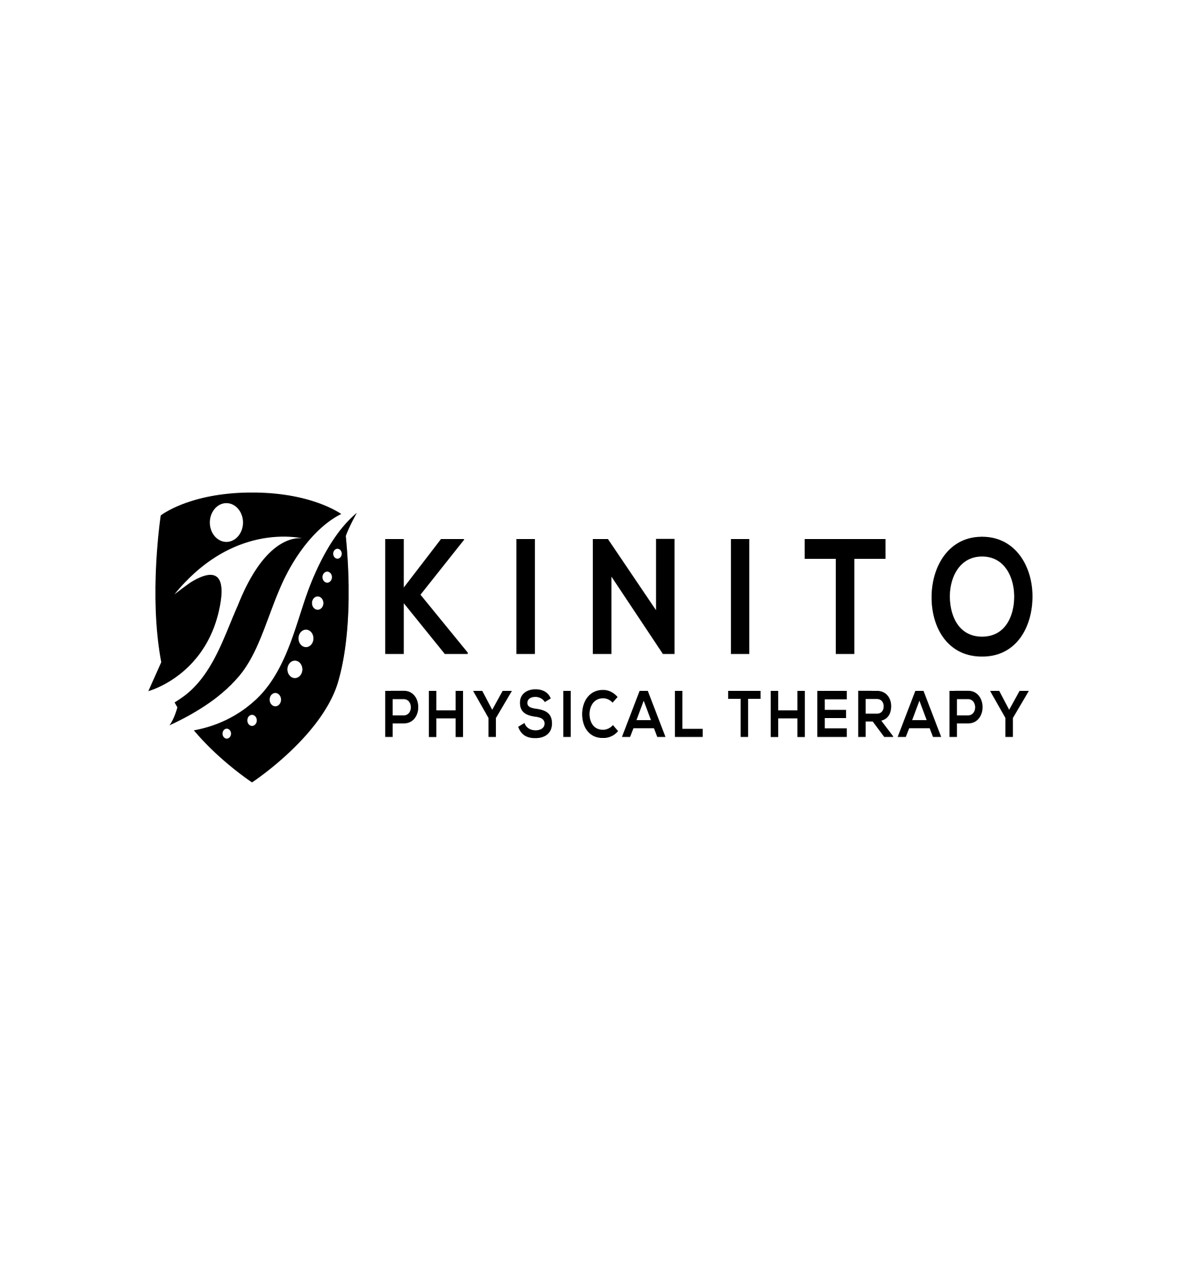 Kinito Physical Therapy (Grayson Starbuck, DPT)